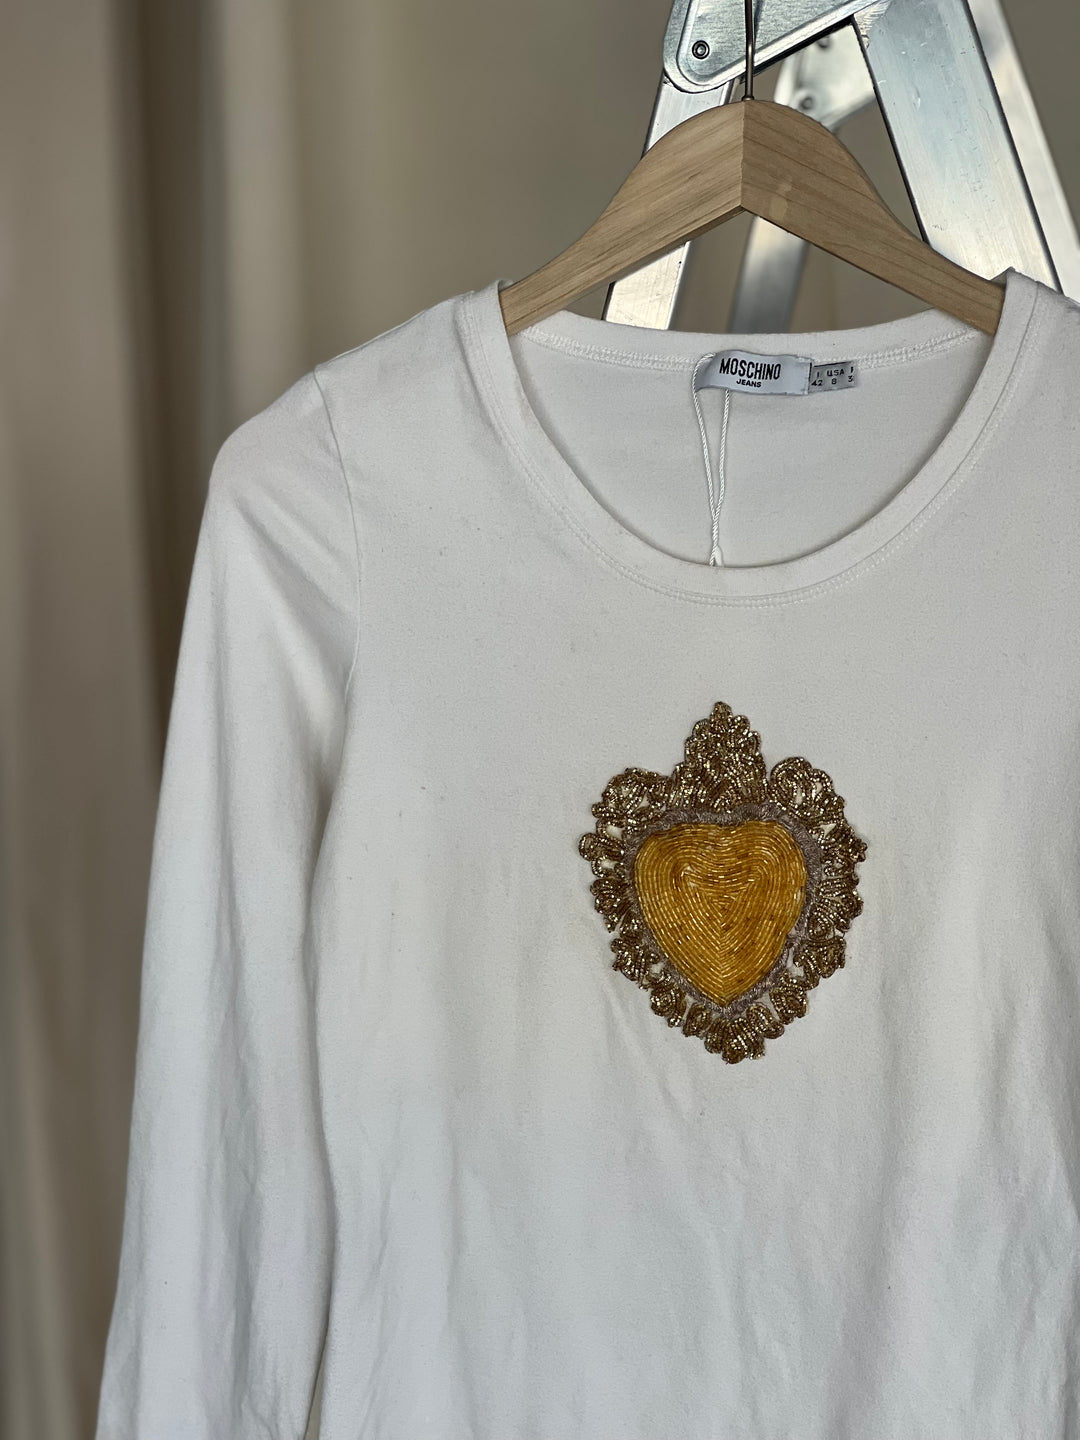 Vintage Moschino Embroidered Gold Heart Sweatshirt Women’s Small